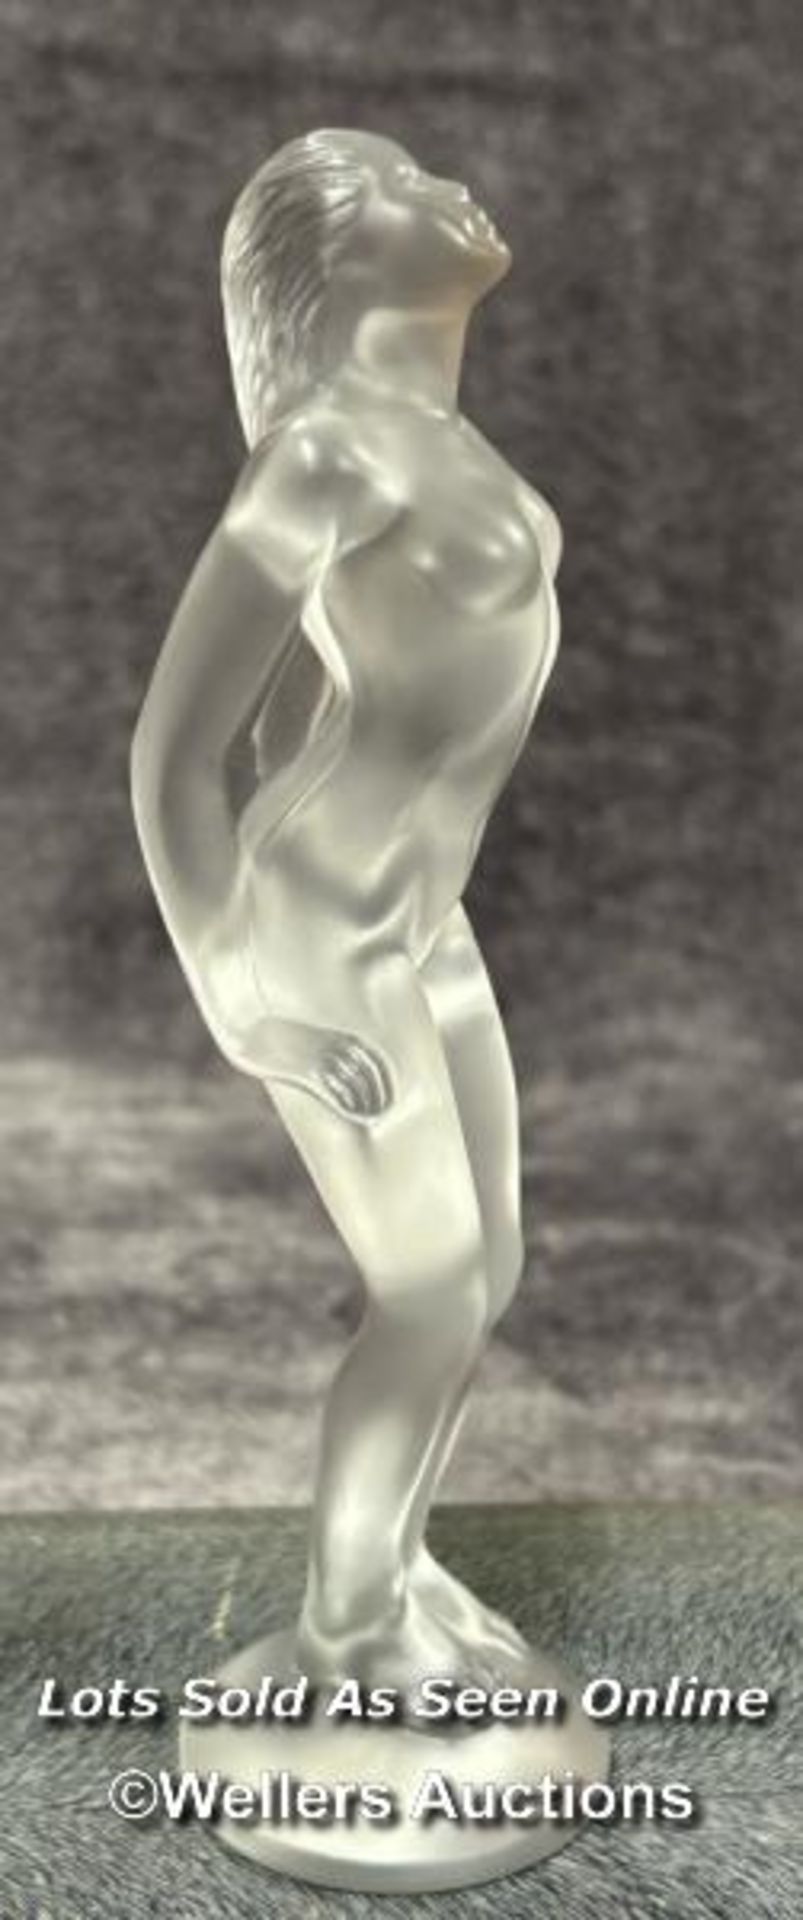 Lalique frosted crystal figurine 'Josephine' signed at the base, 19cm high / AN2 - Image 2 of 4